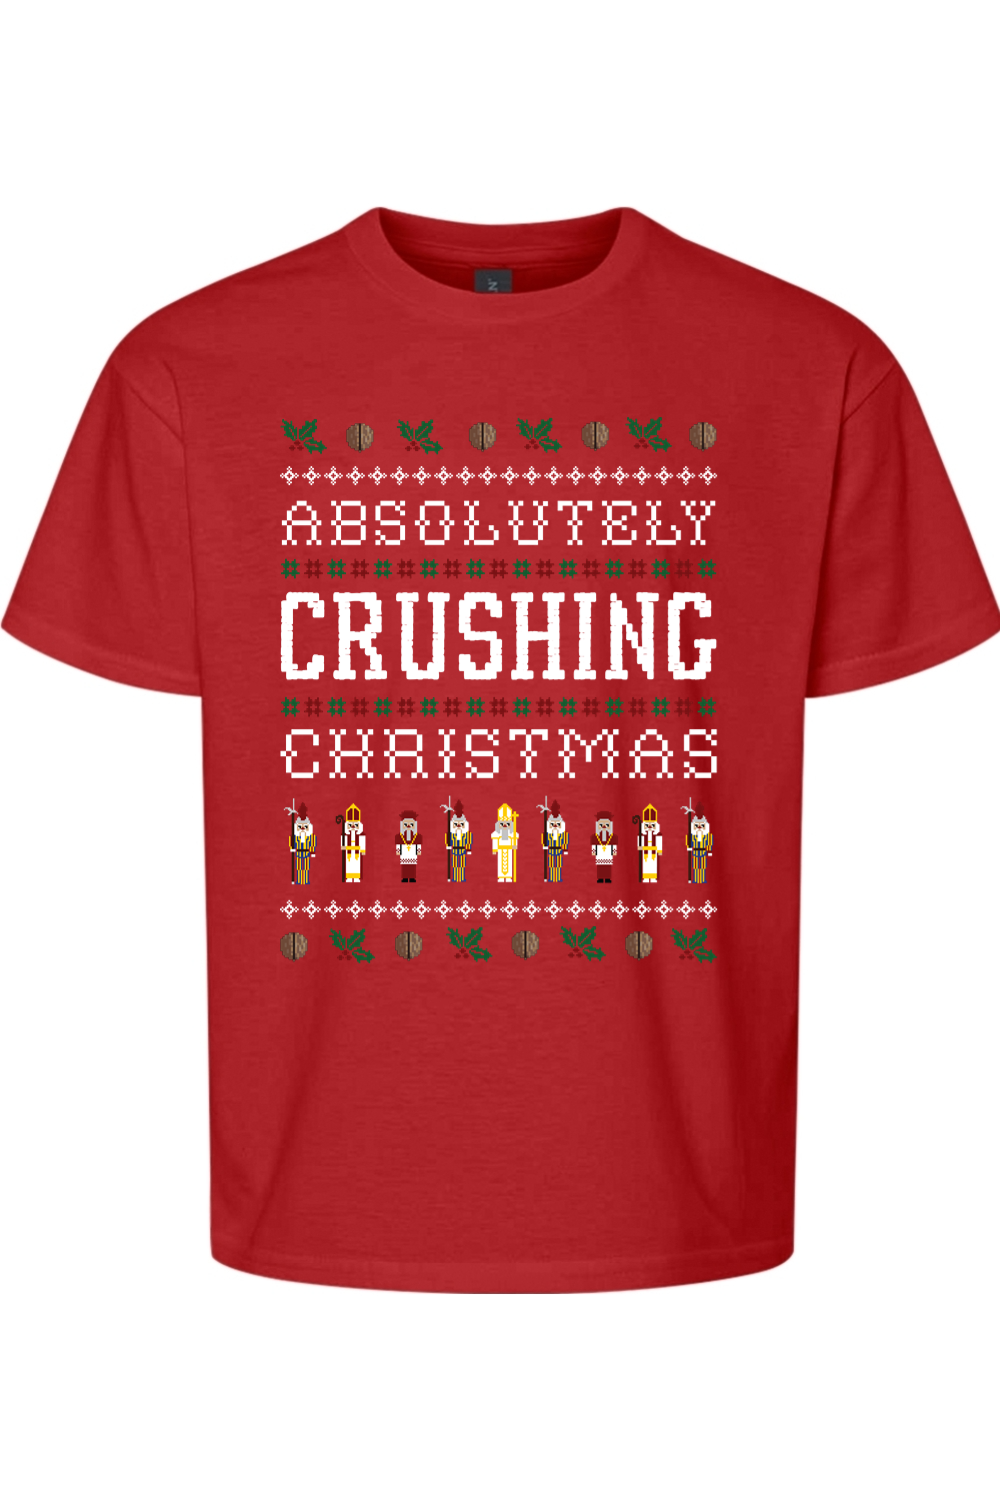 Absolutely Crushing Christmas Youth T-Shirt